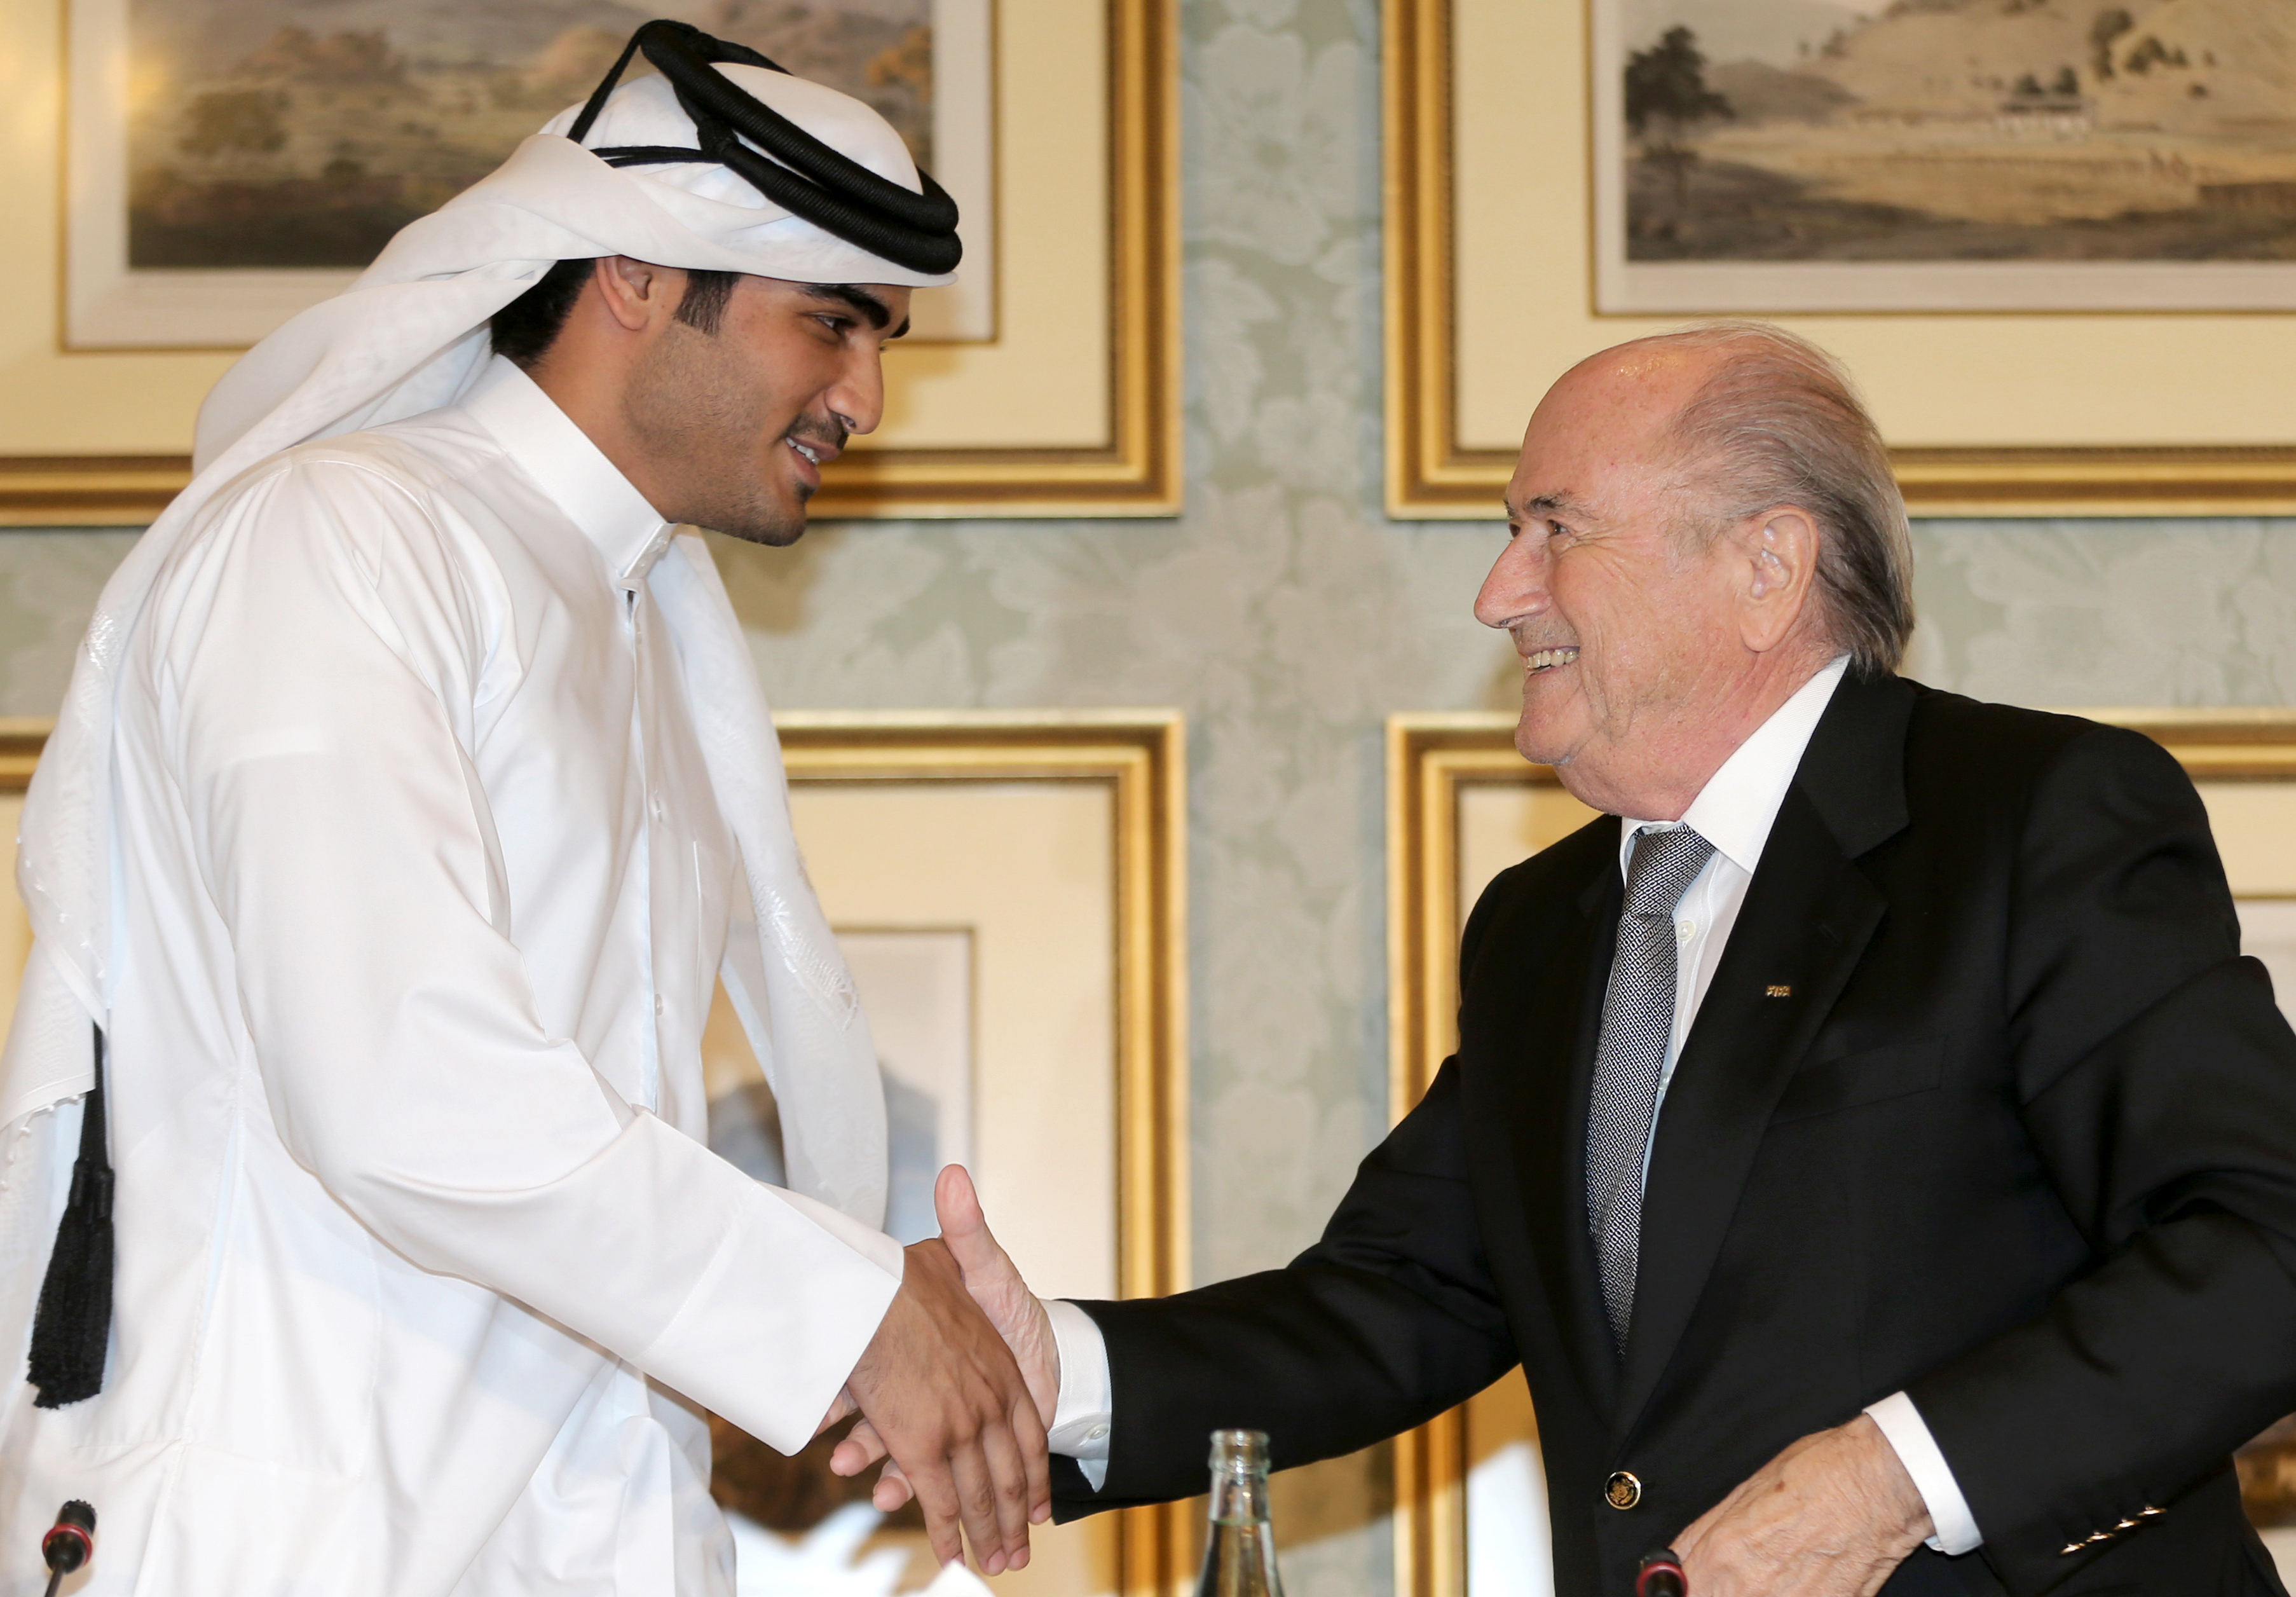 Chairman of the Qatar 2022 bid committee Sheikh Mohammed bin Hamad al-Thani, left, shakes hands with FIFA president Sepp Blatter during a press conference in the Qatari capital Doha on November 9, 2013.  (Getty)